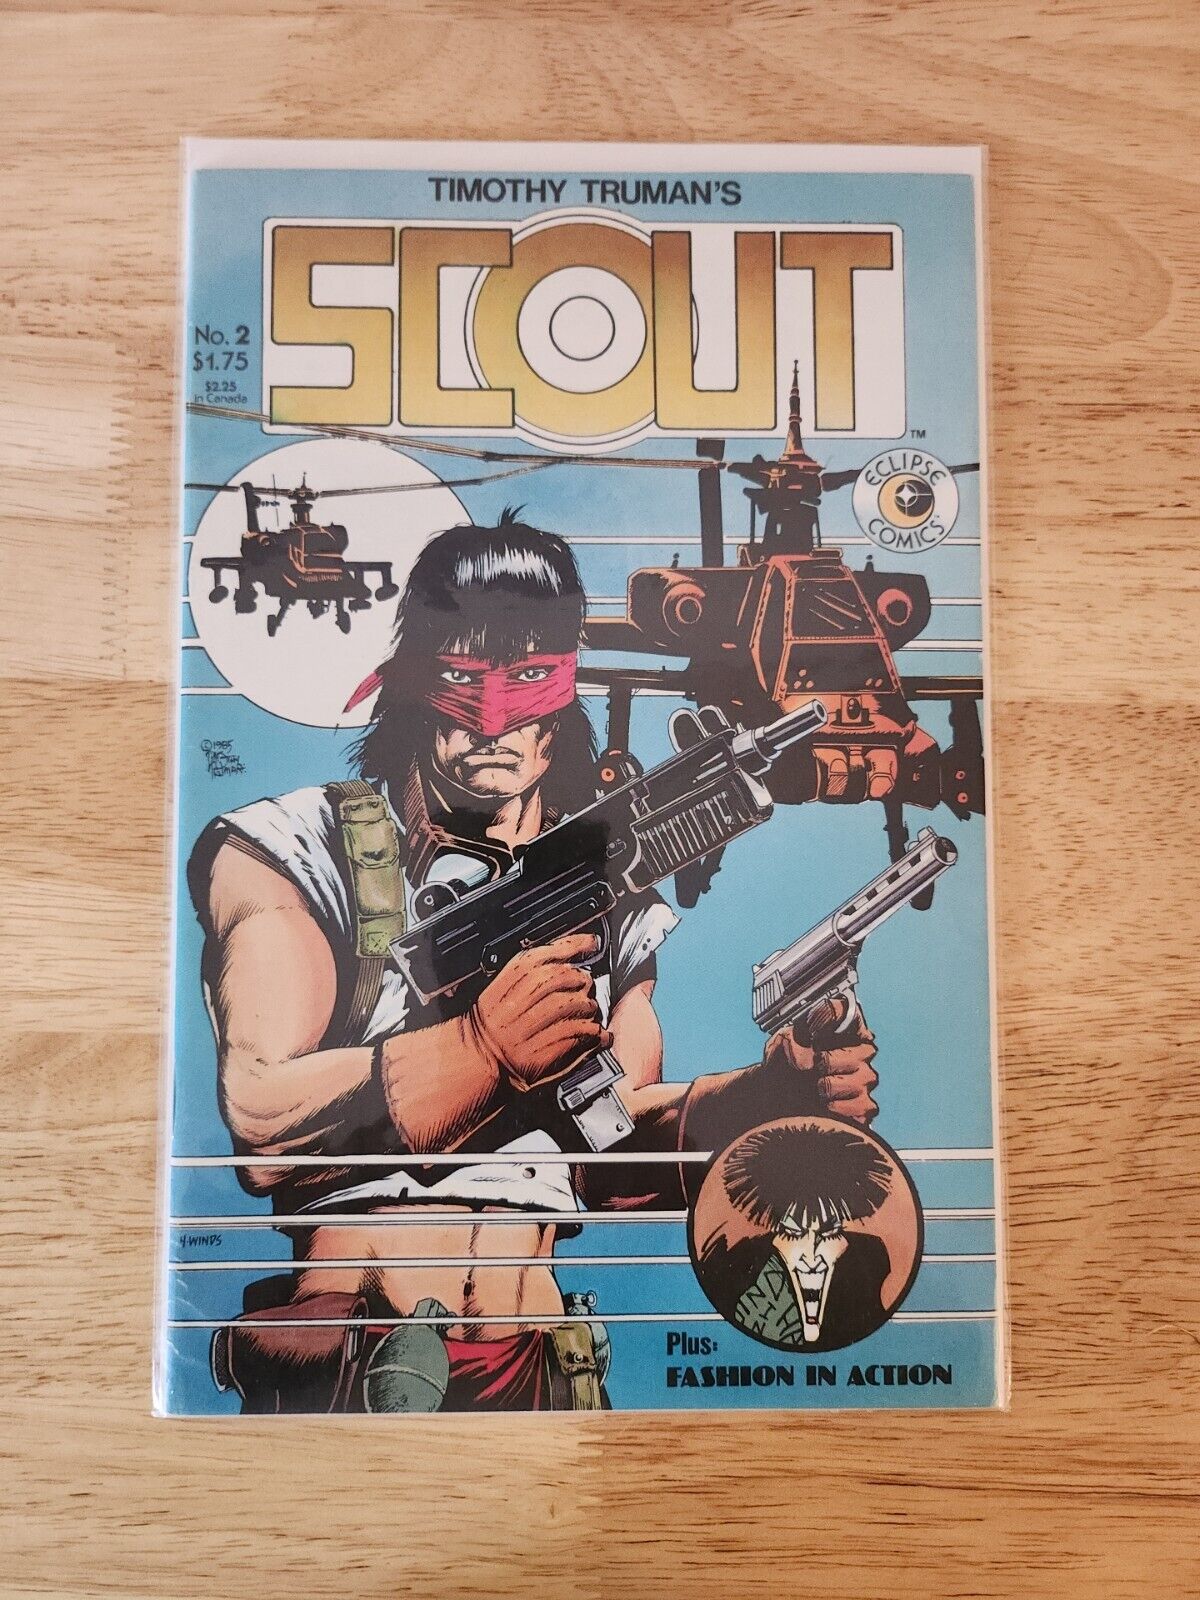 Scout #2 1985 VF- Eclipse Comics Script and art by Timothy Truman Comic